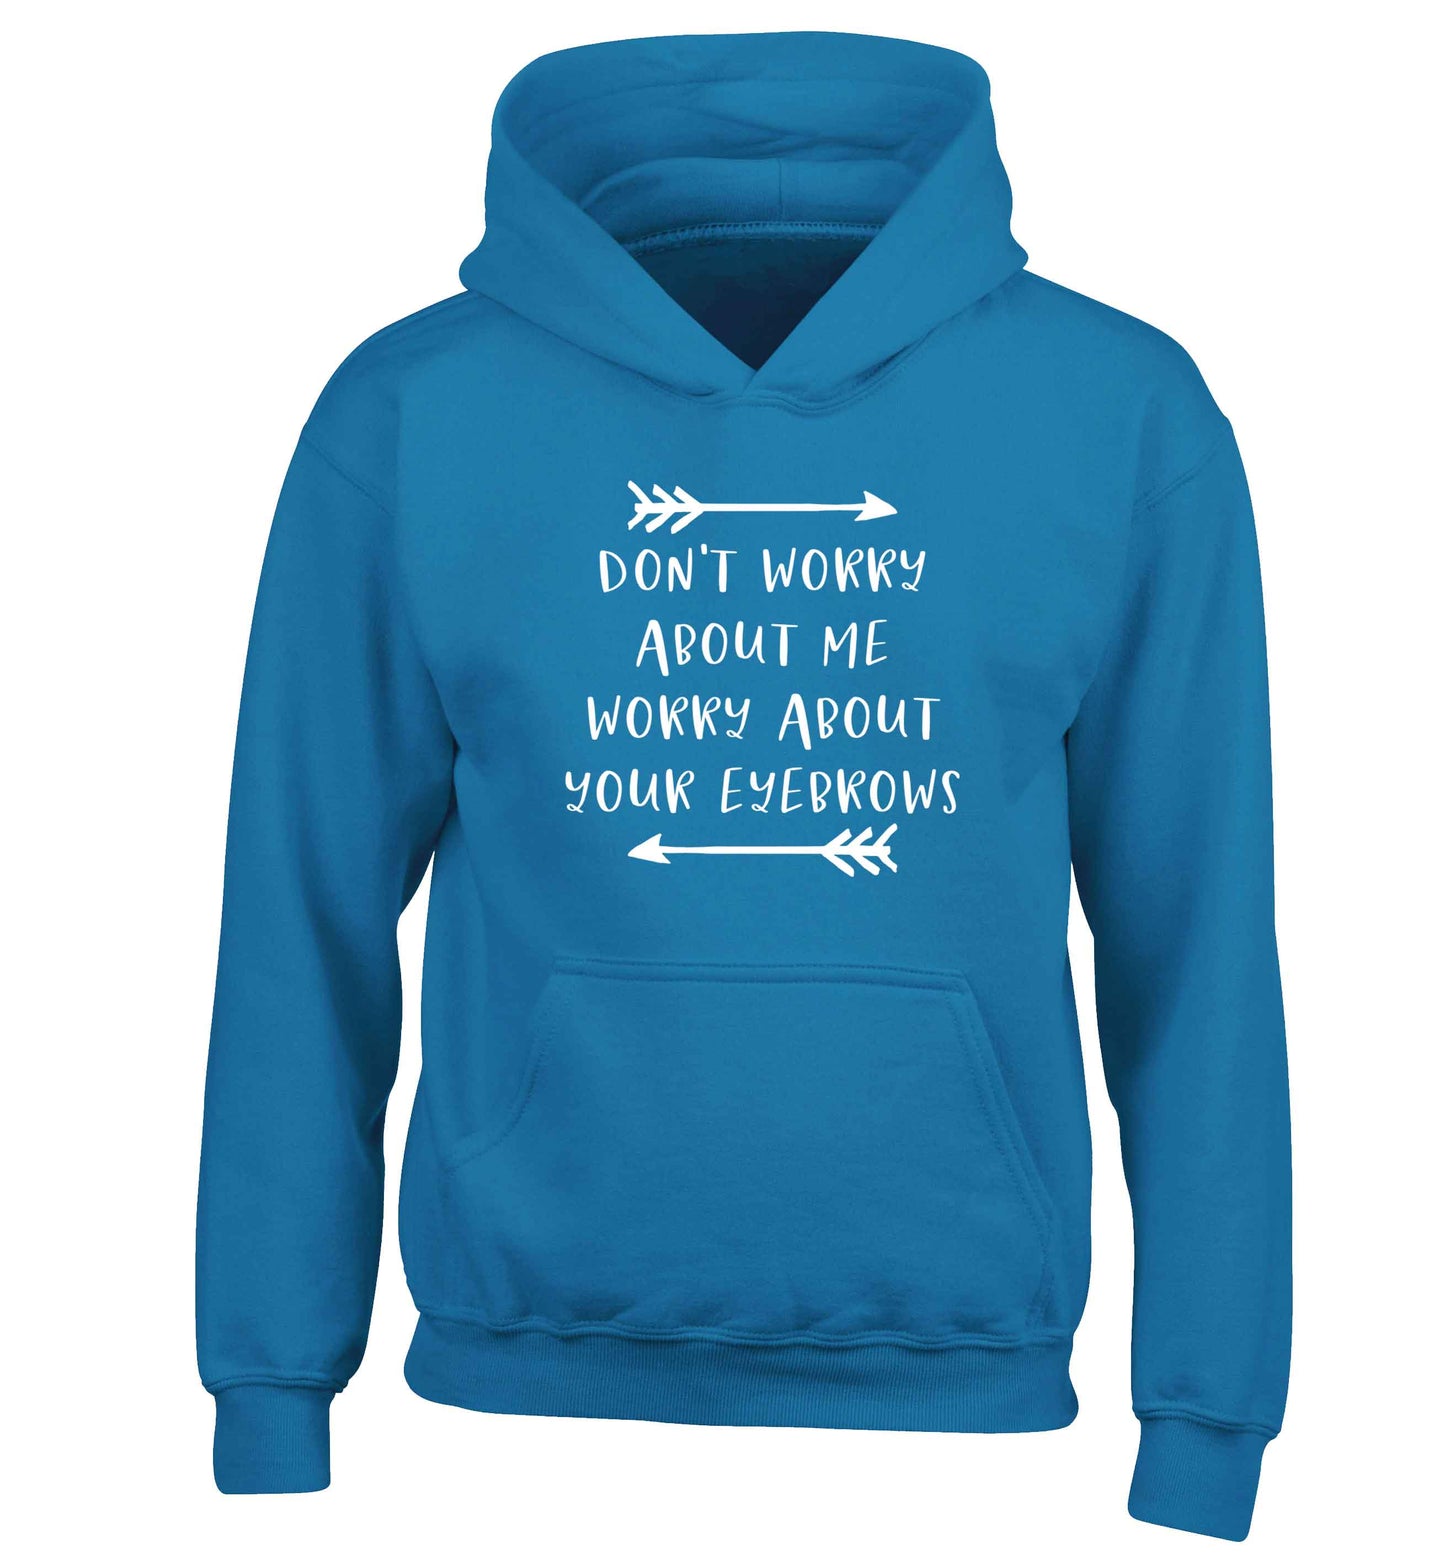 Don't worry about me worry about your eyebrows children's blue hoodie 12-13 Years